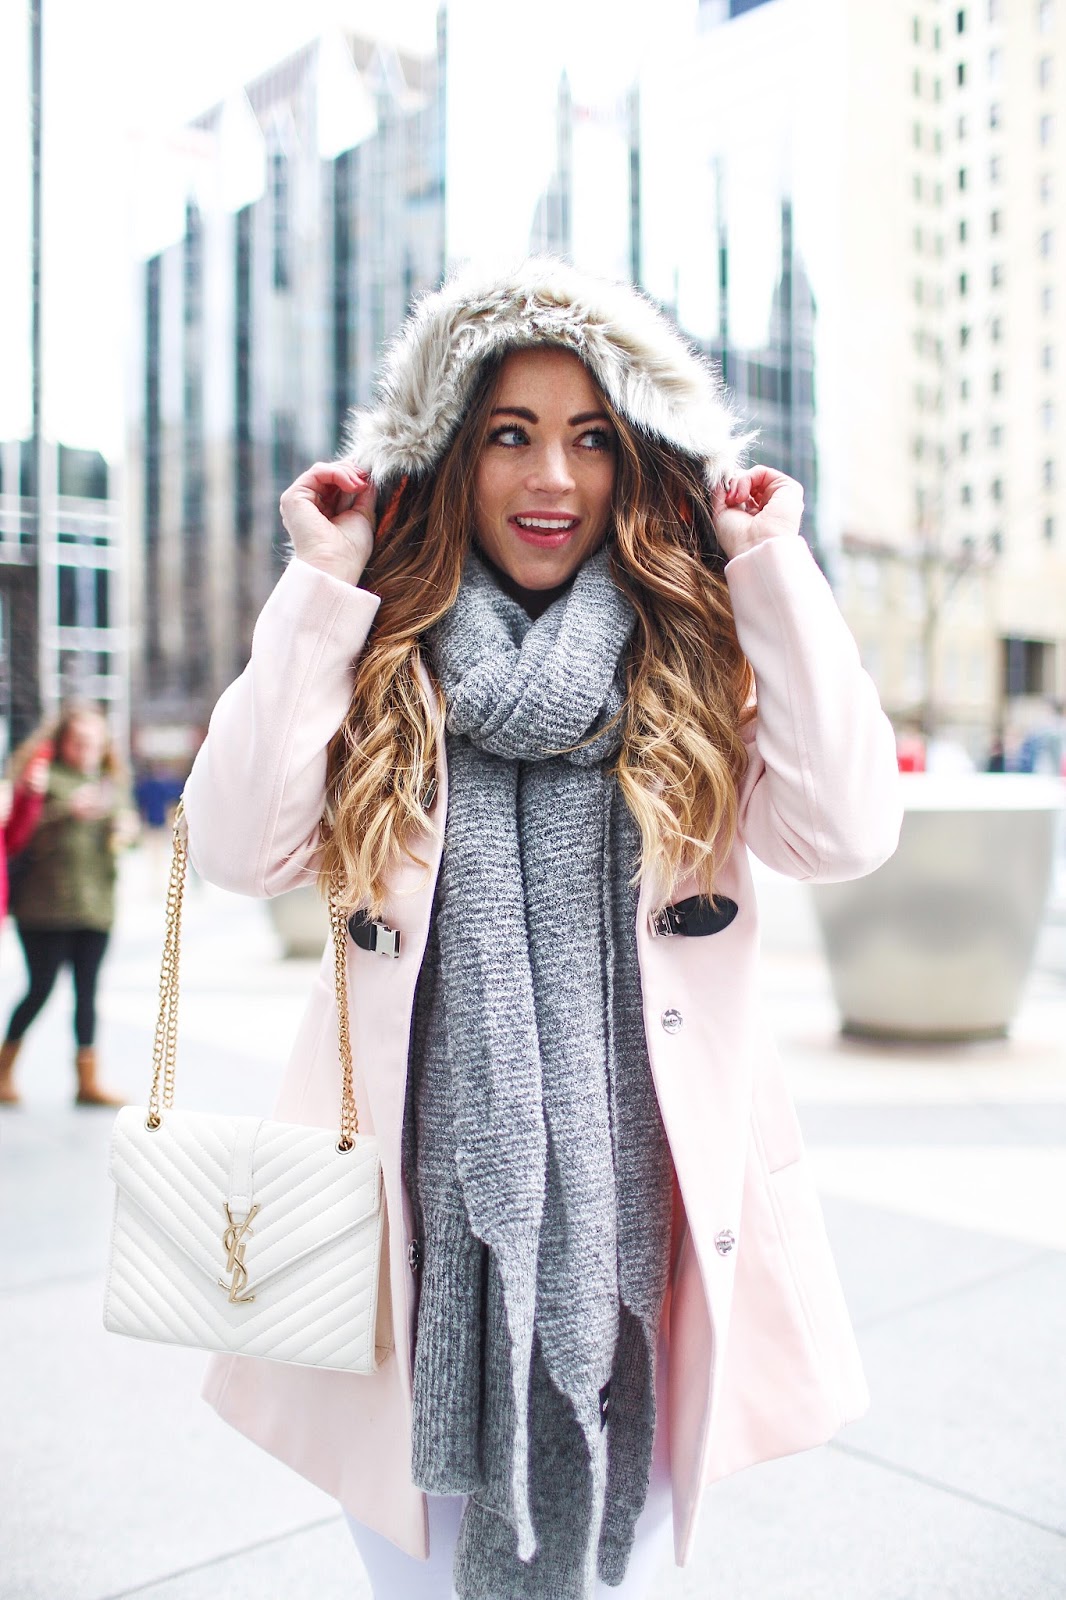 Winter Pastels at PPG Ice Rink • Brittany Ann Courtney